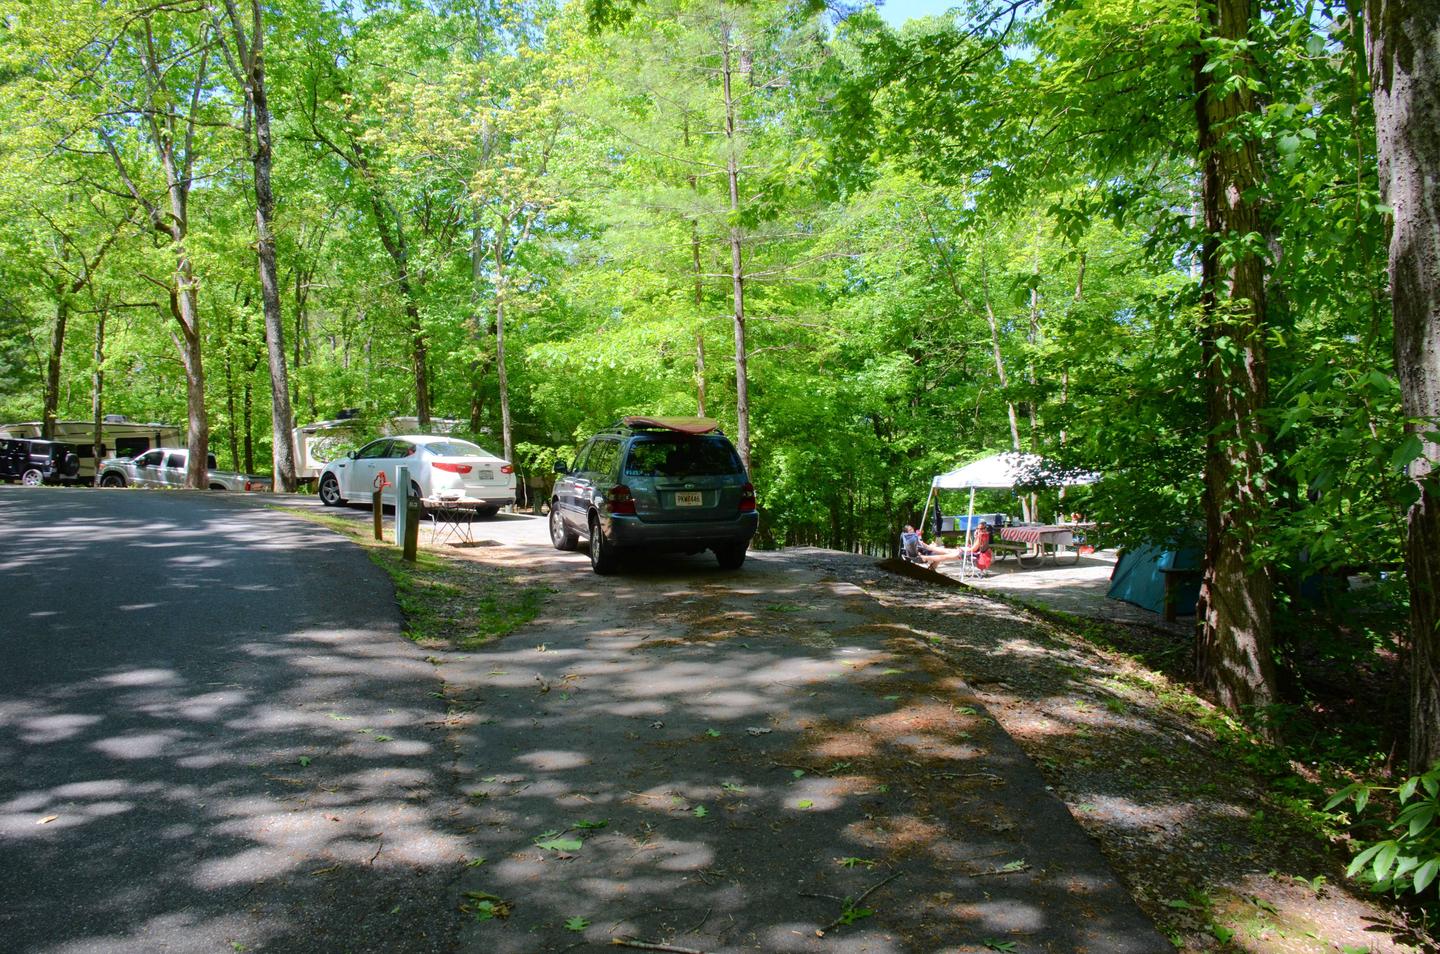 Pull-thru entrance, utilities-side clearance.McKinney Campground, campsite 83.